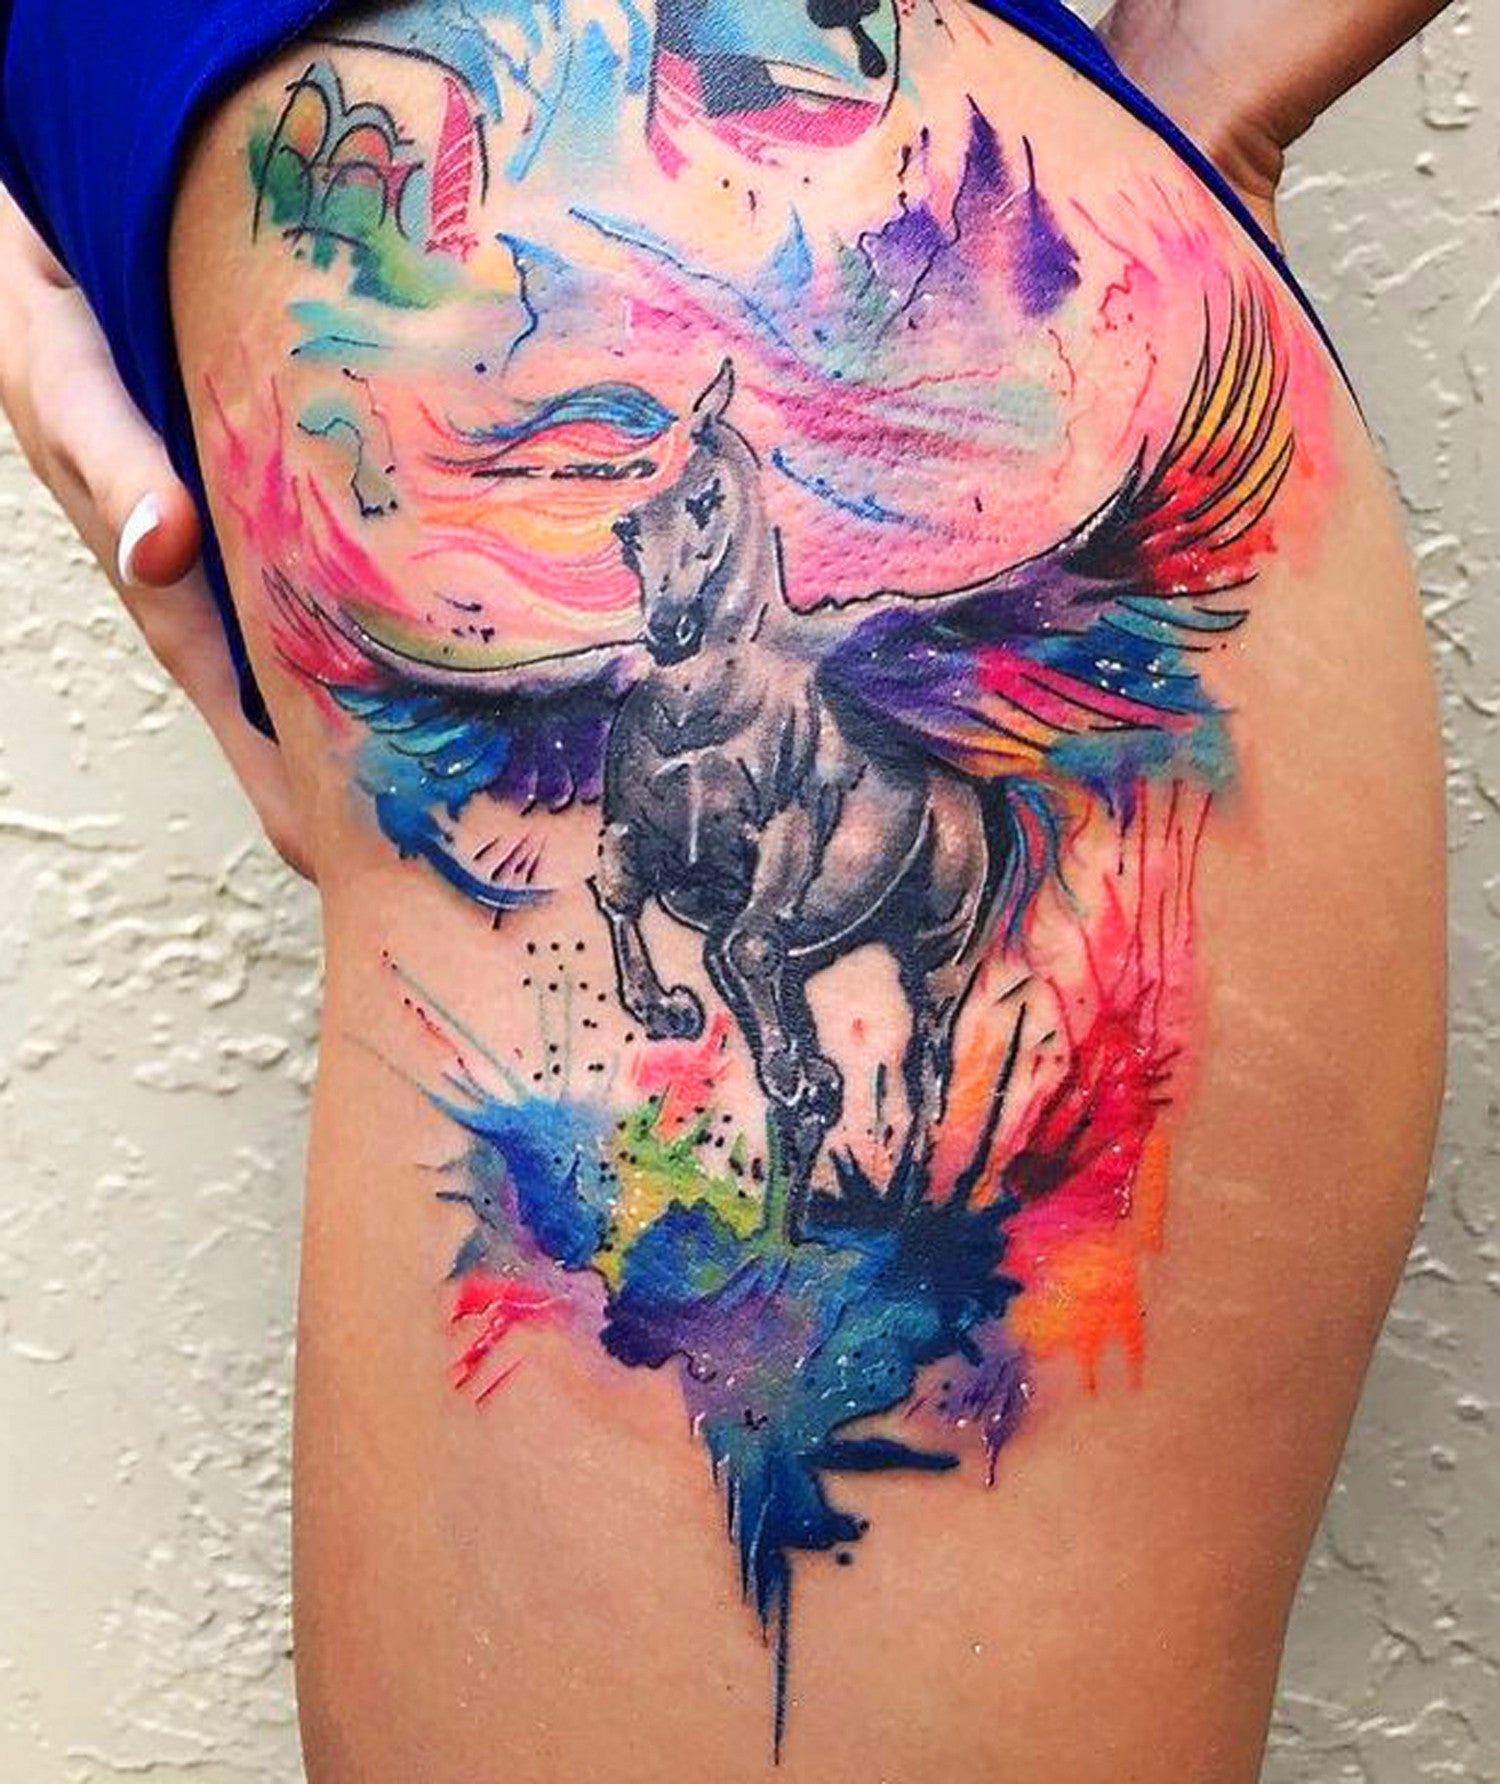 25 Of The Best Watercolor Tattoo Ideas For Cool Women | YourTango